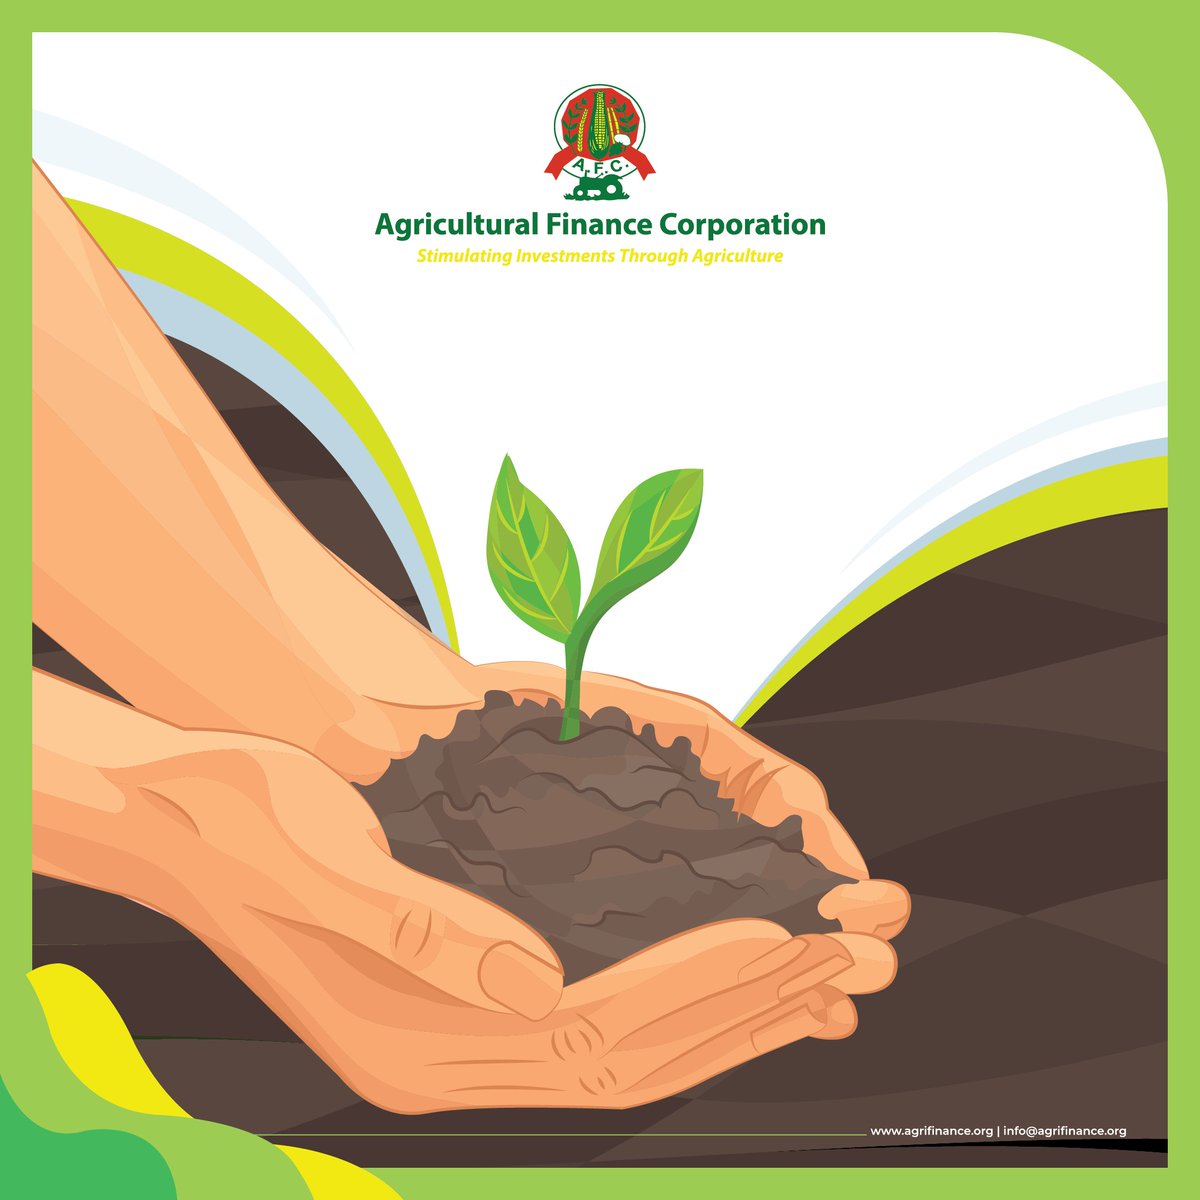 The planting season is here. We encourage you to use certified seeds. The seeds result in high yields, quality crop production and better returns when all other factors of crop production and agricultural practices are optimal and good. @KephisKe